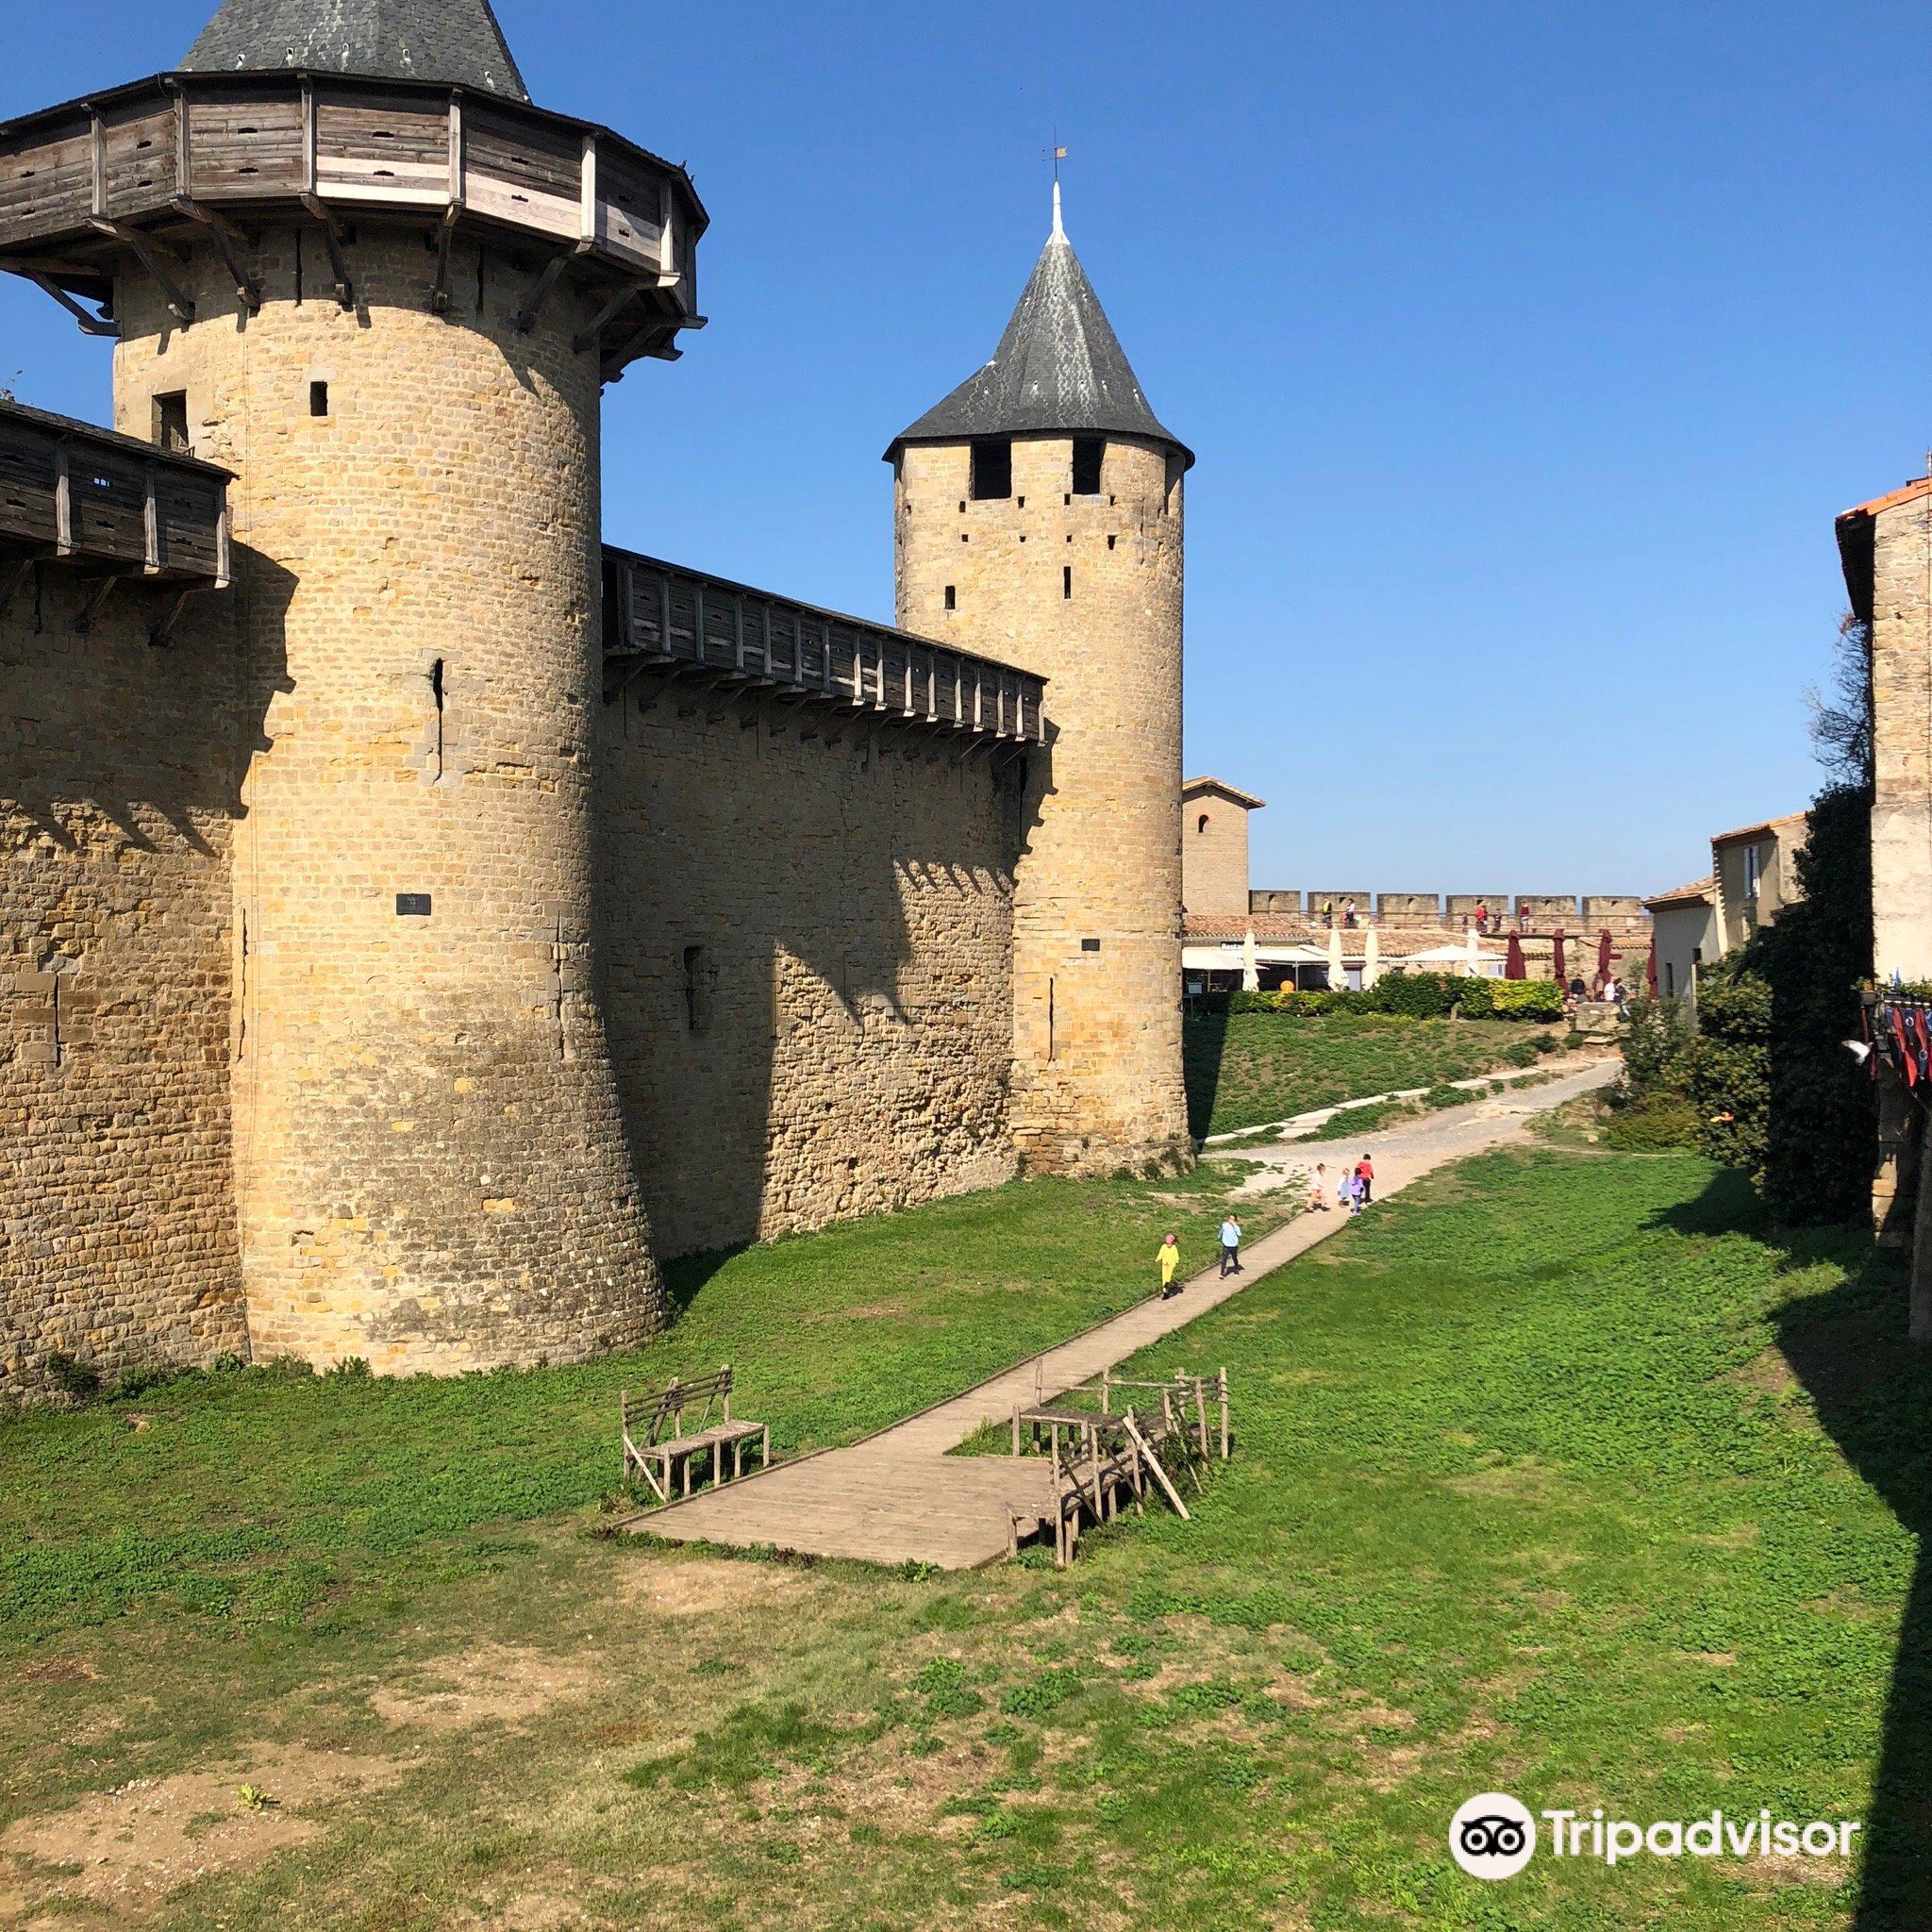 THE 5 BEST Parks & Nature Attractions in Carcassonne Center (2023)